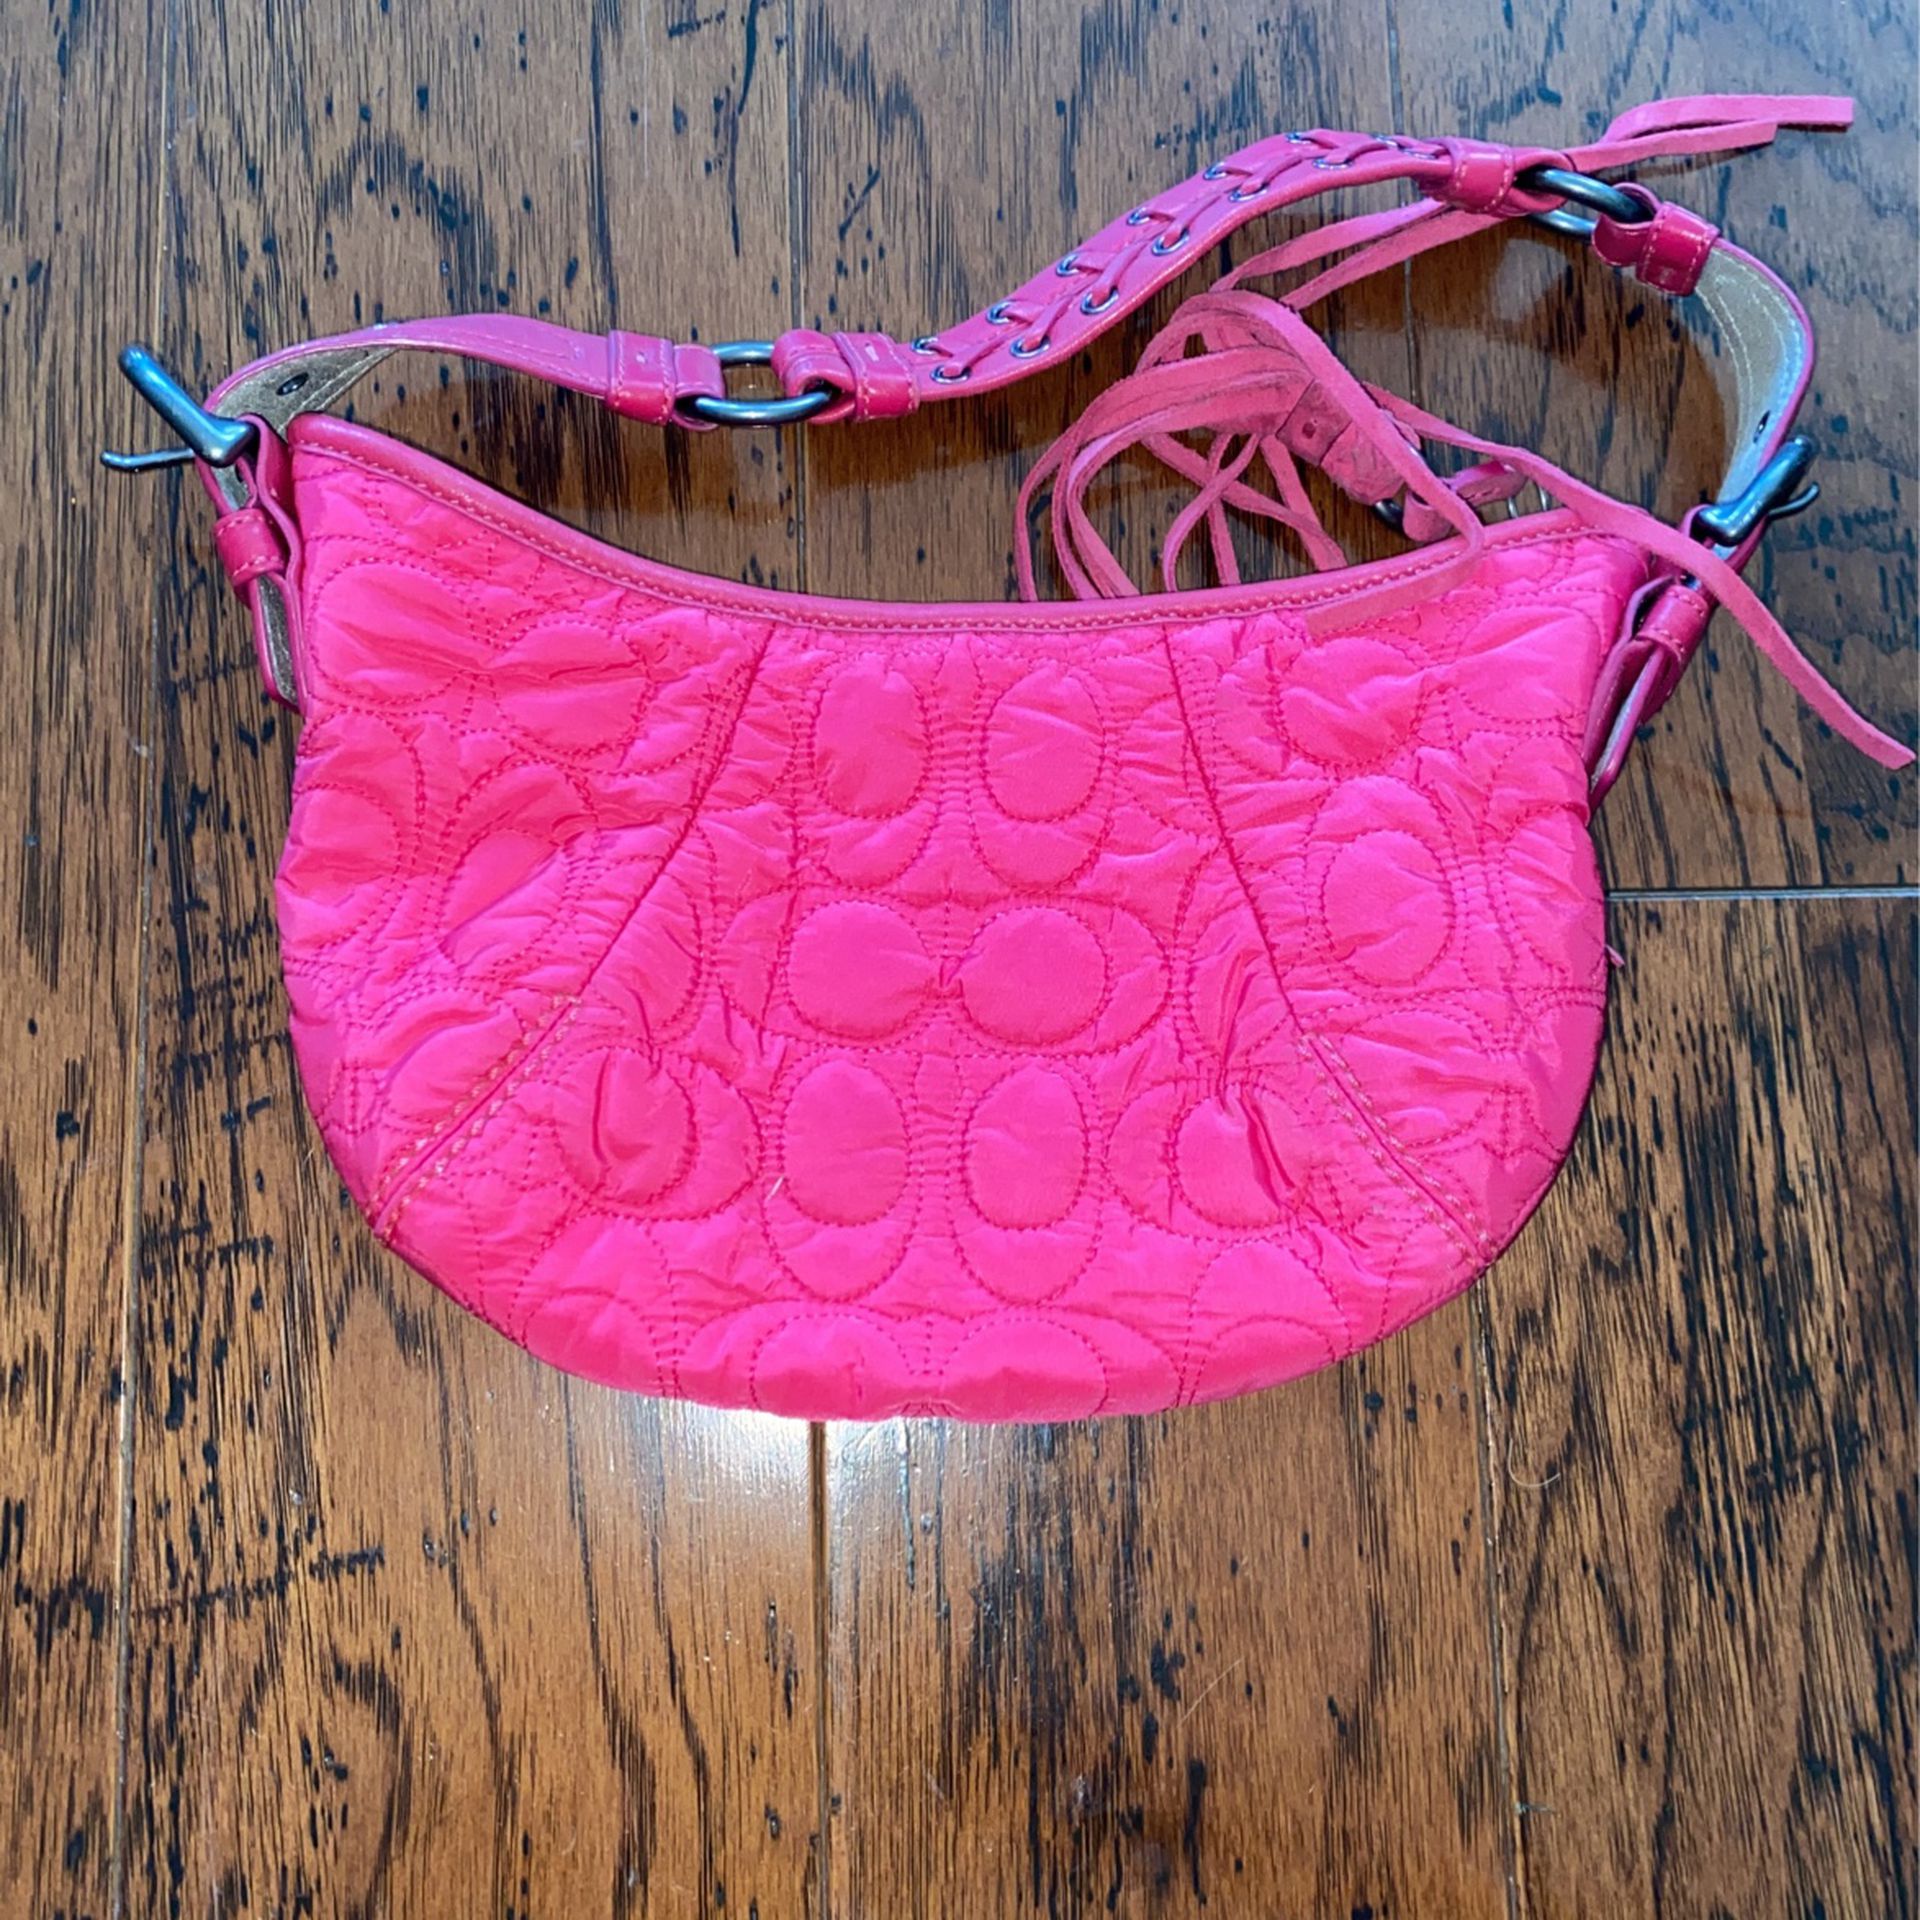 Pink Coach Purse for sale